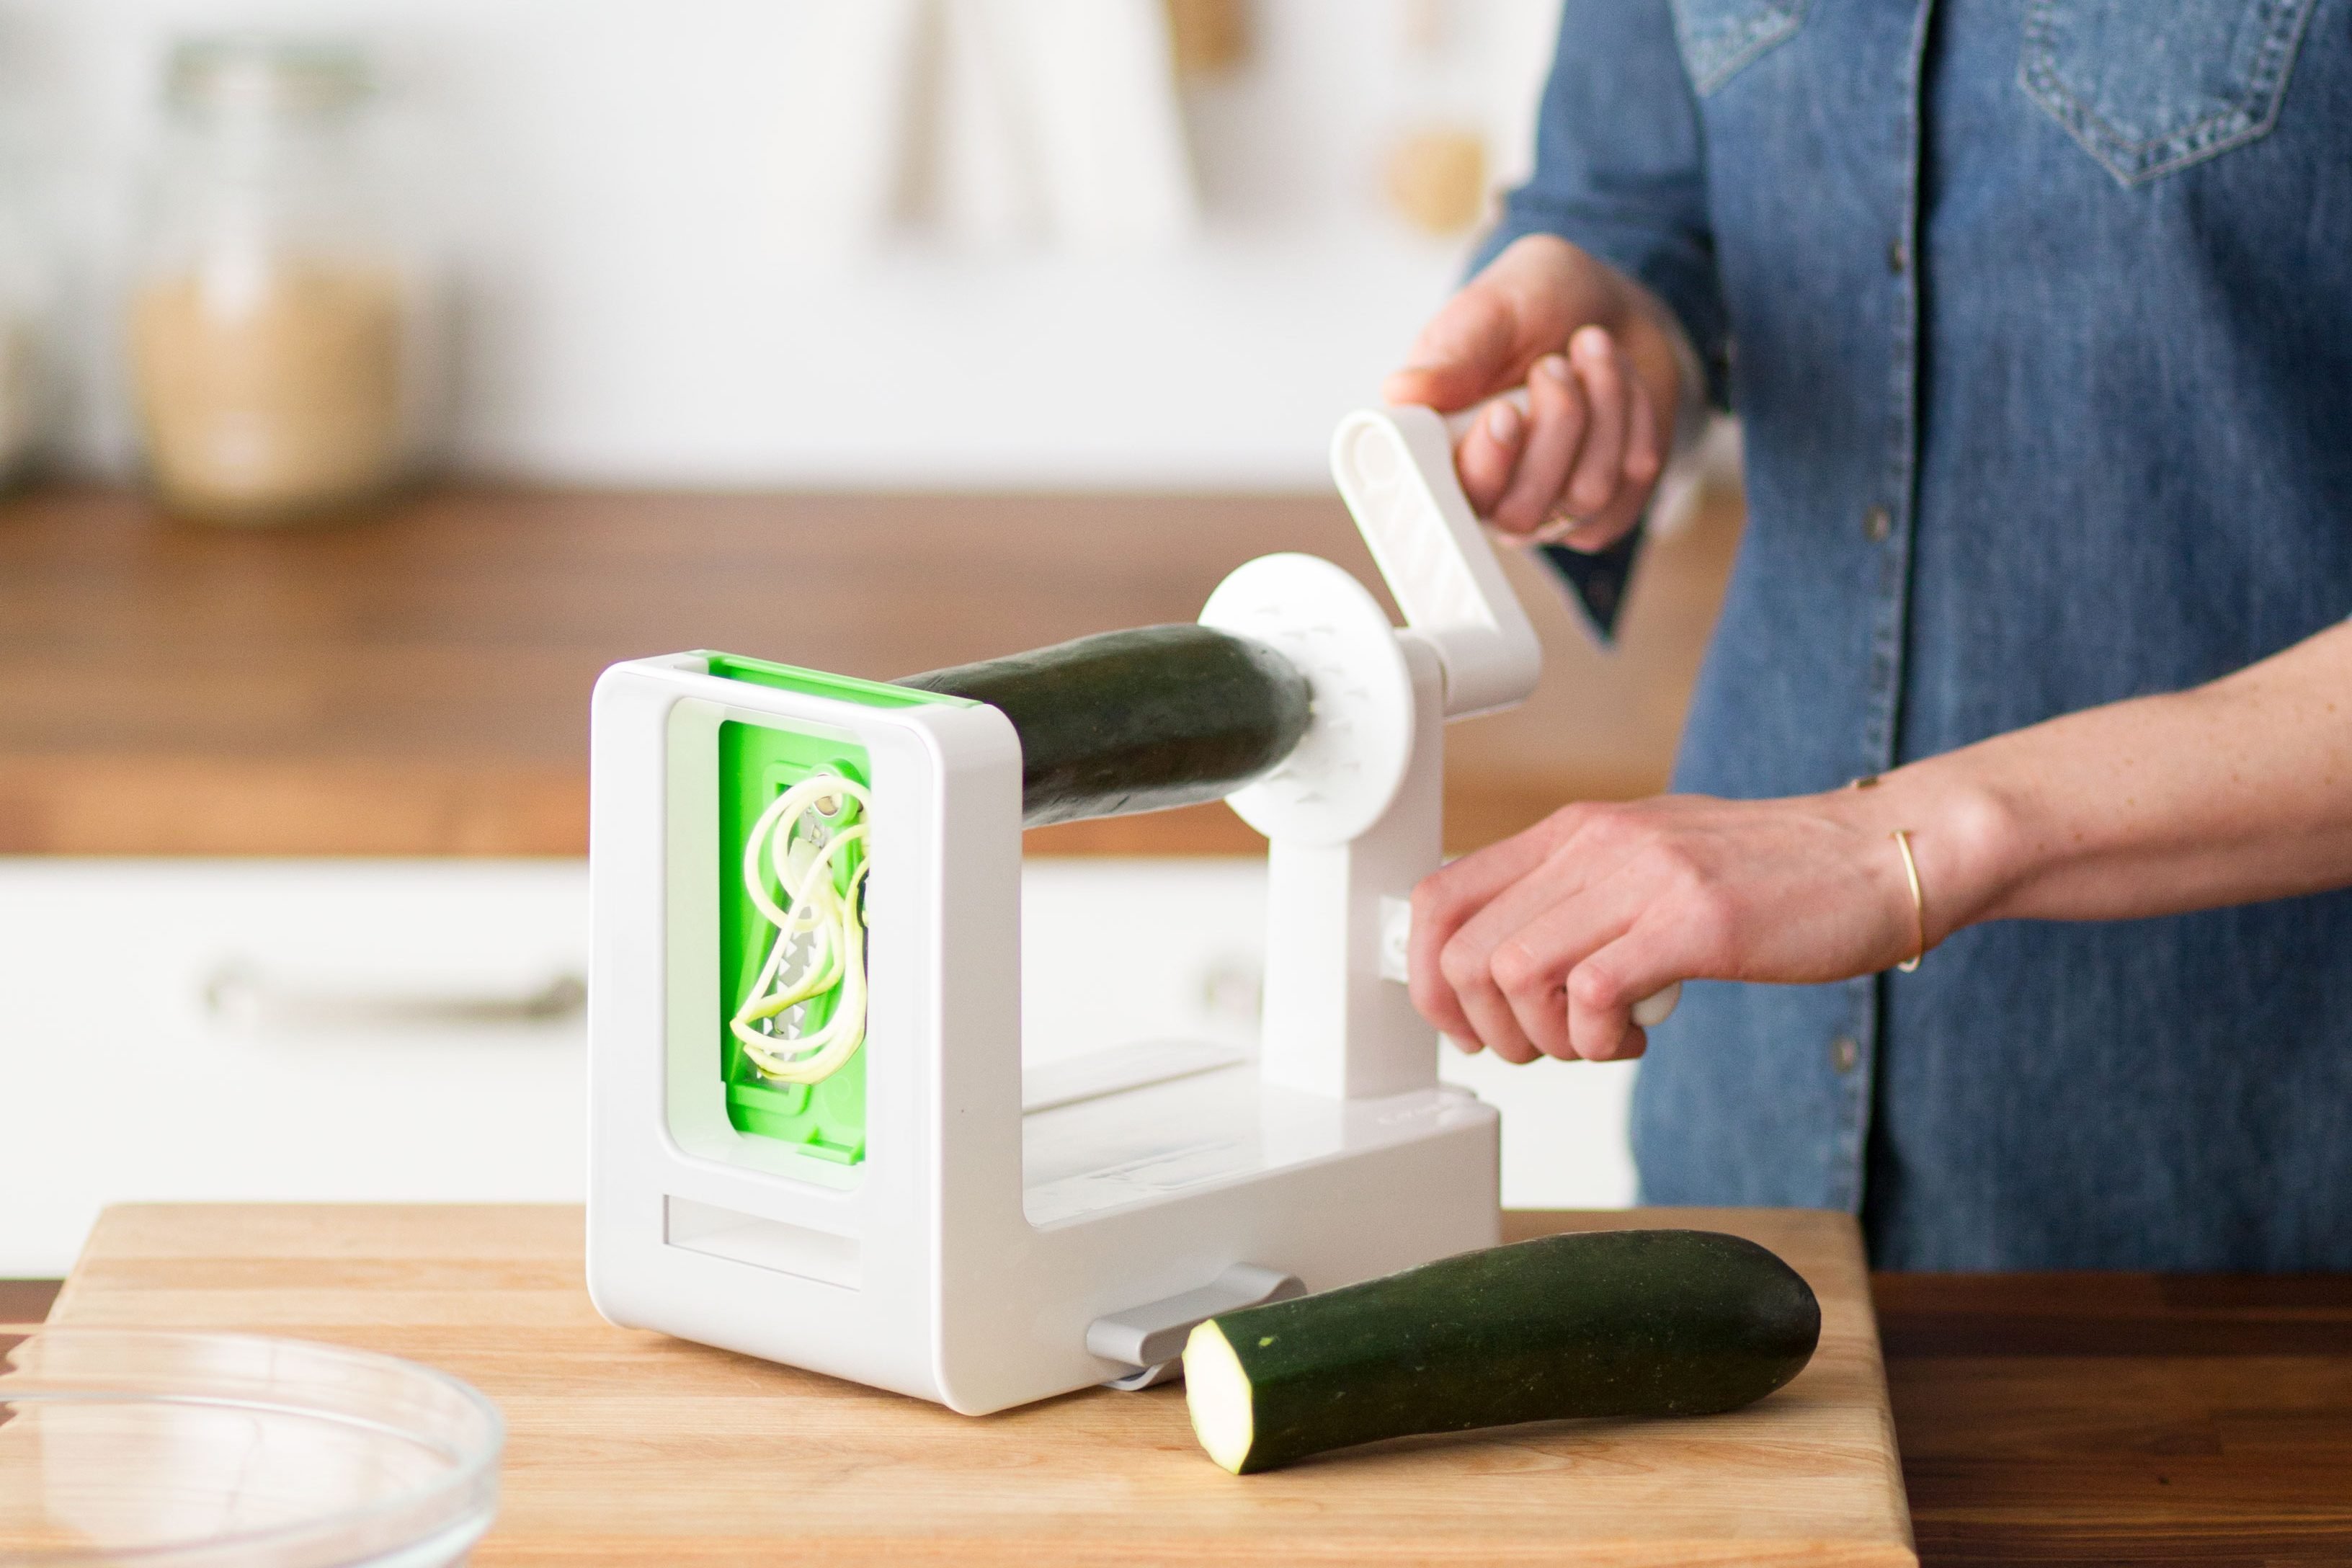 Make Zoodles at Home with this Highly Rated OXO Spiralizer